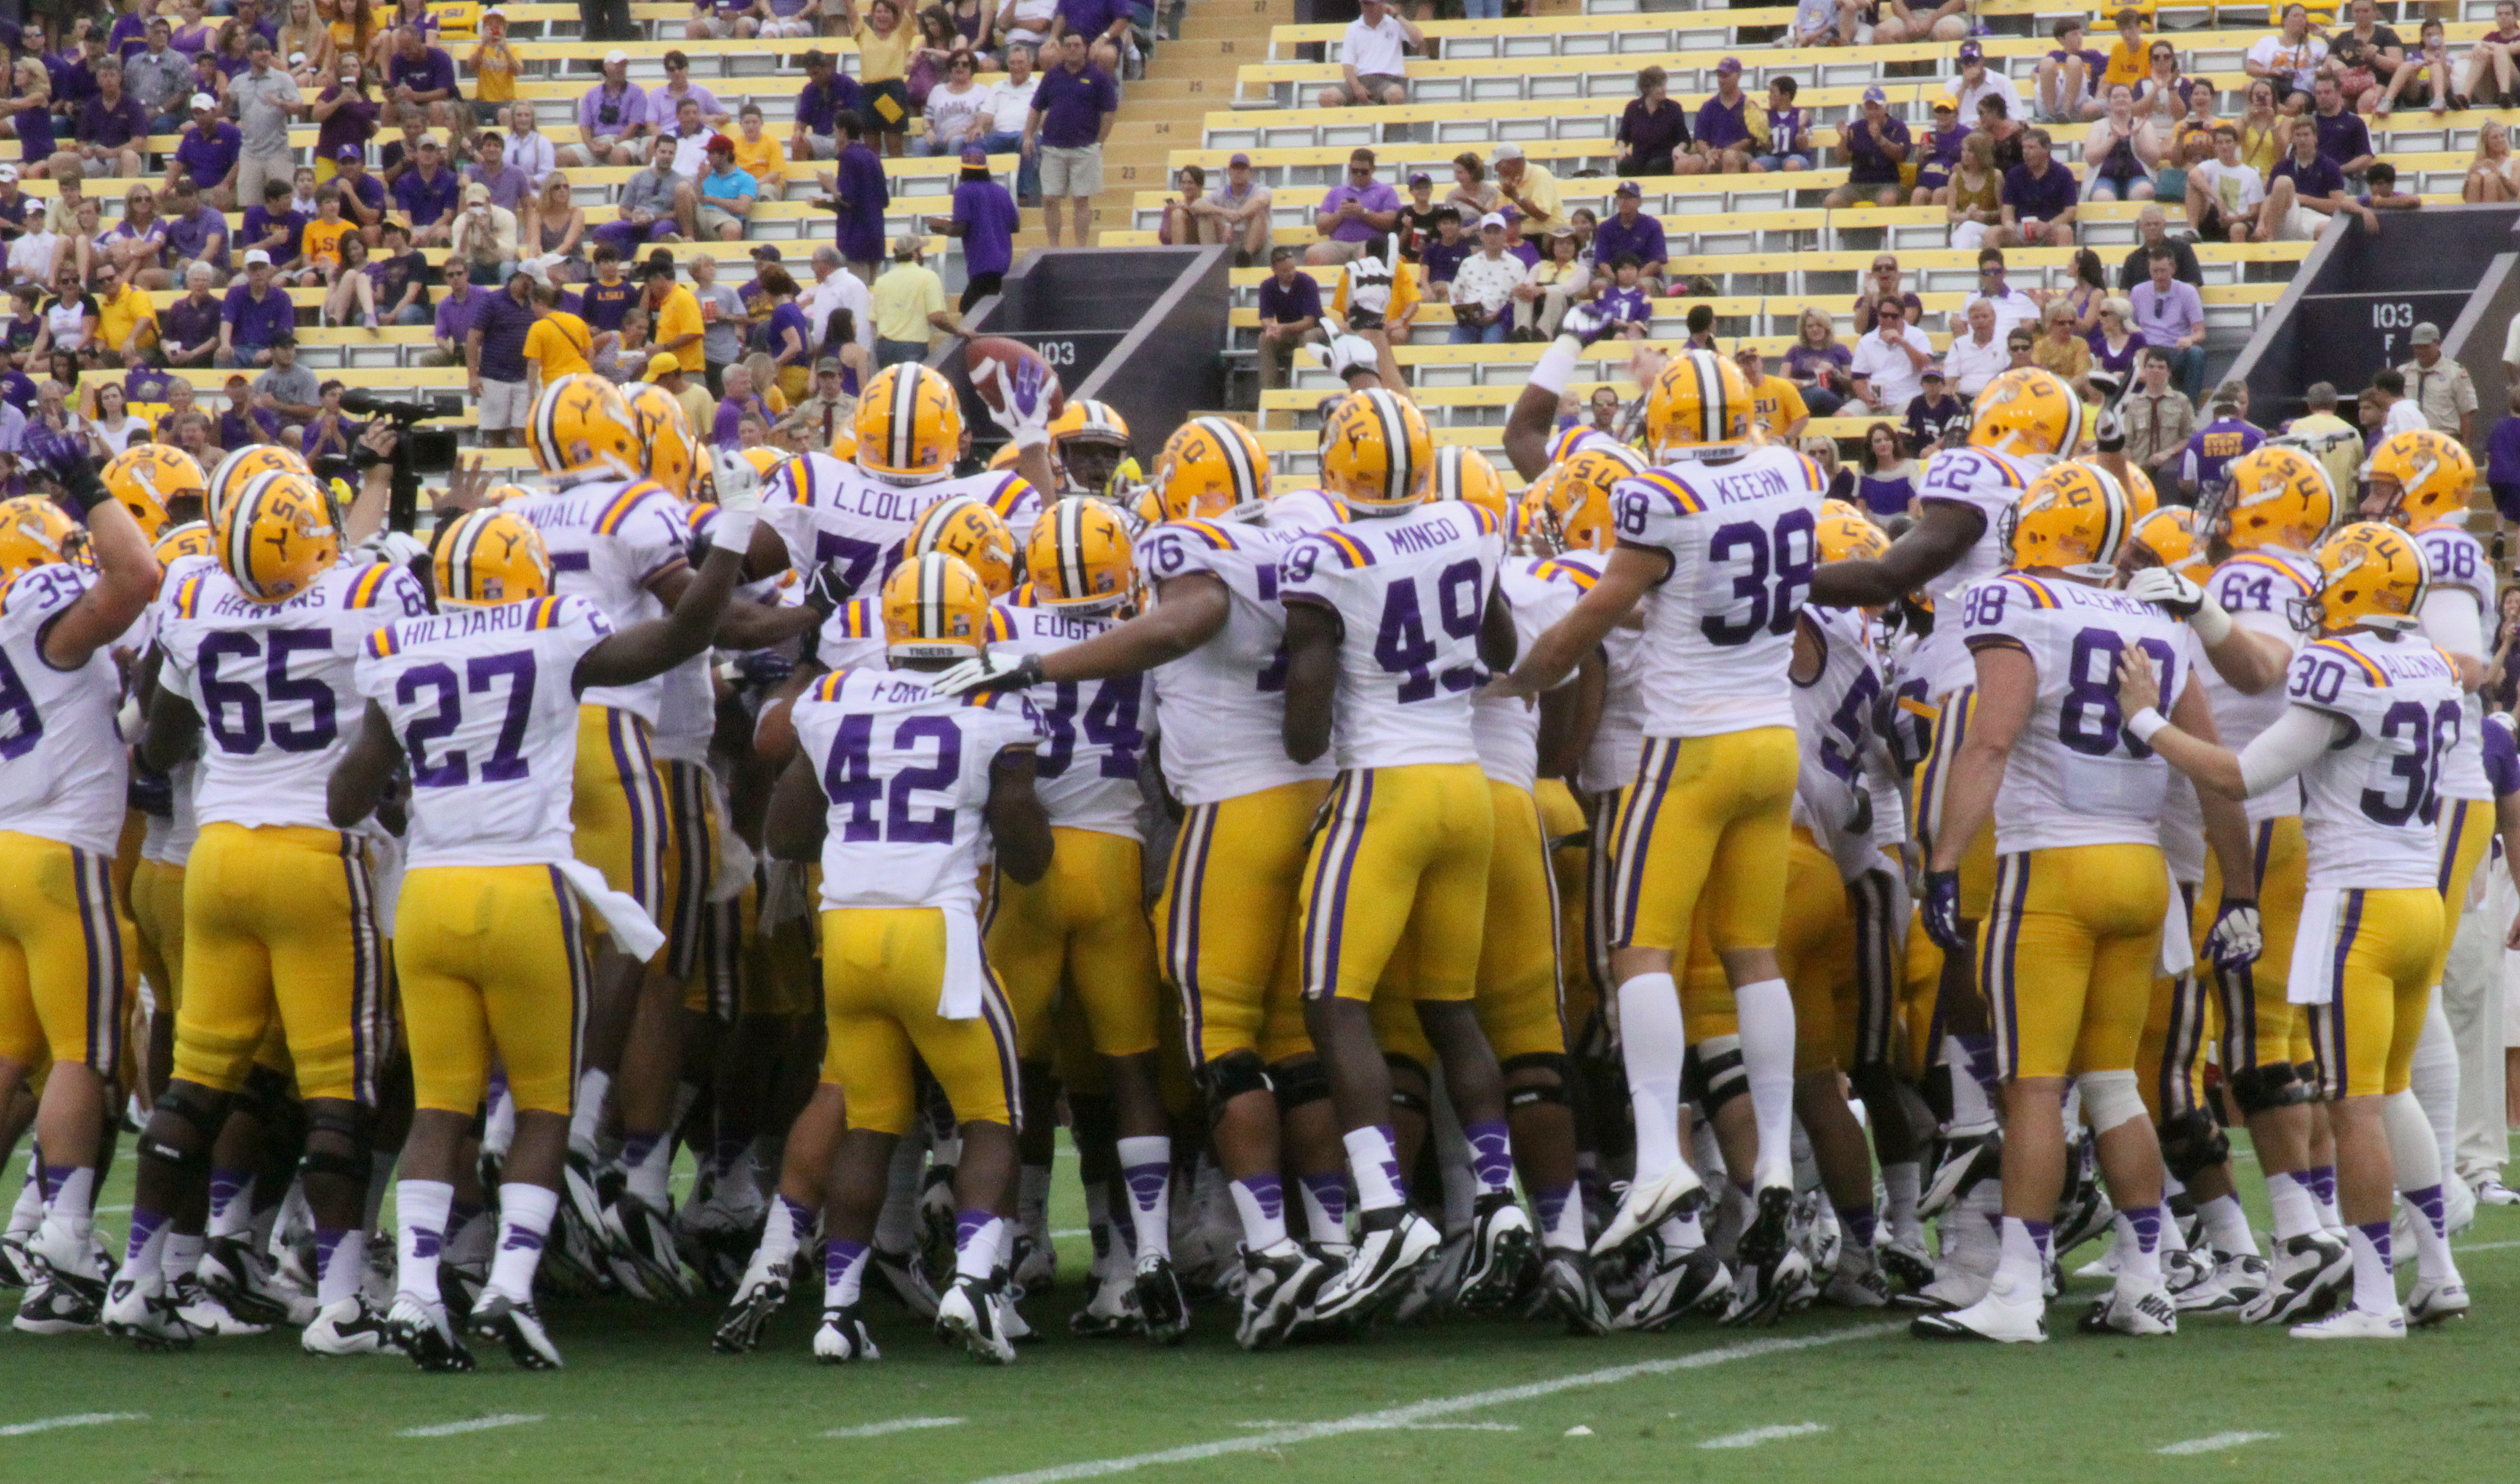 Download this Lsu Tigers Football Team Are Jumping For Joy Alabama Crimson Tide picture